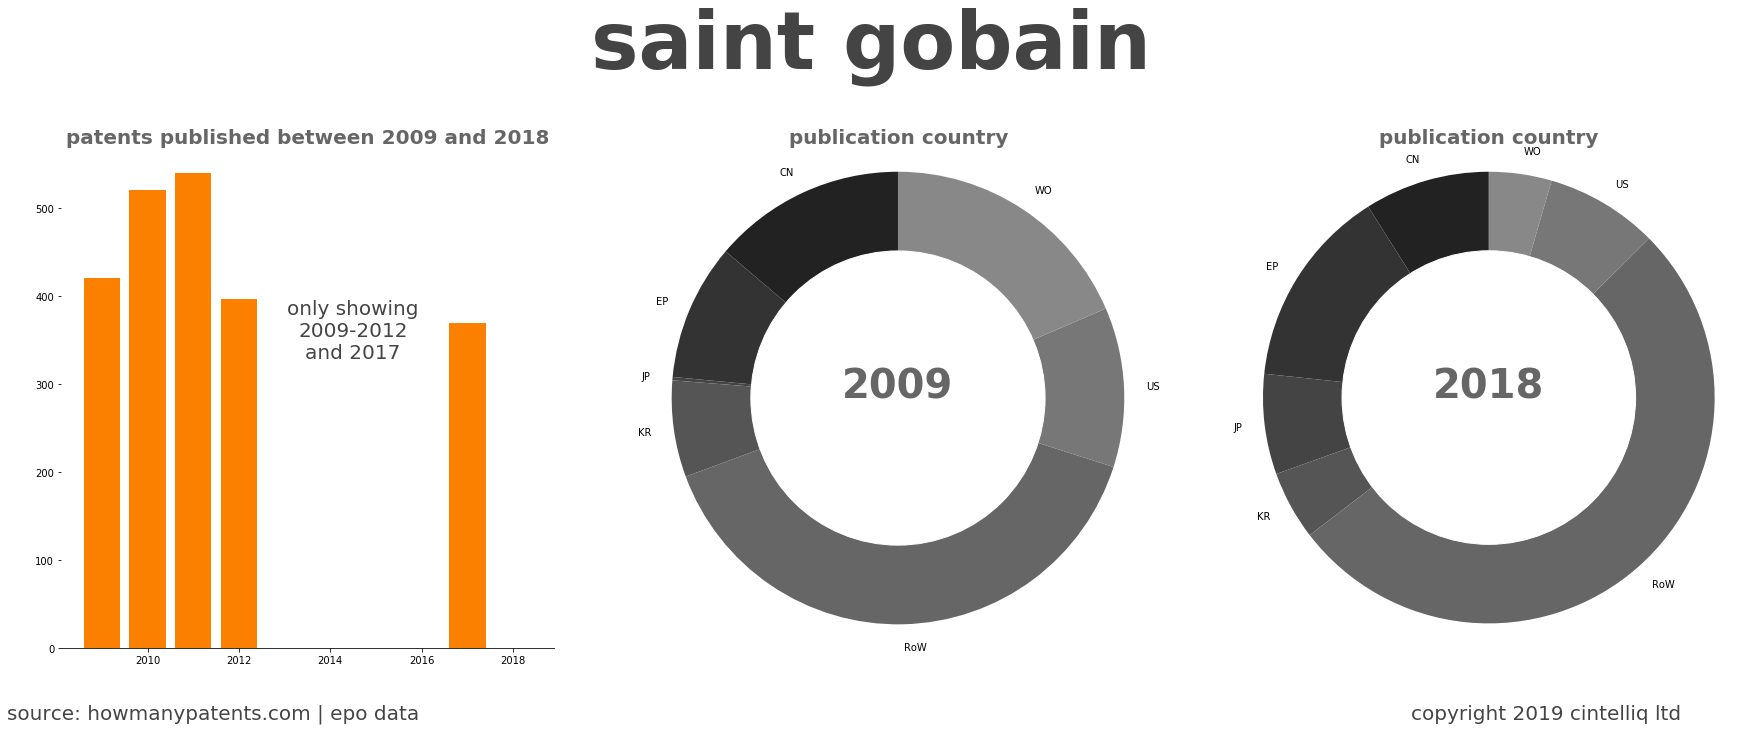 summary of patents for Saint Gobain